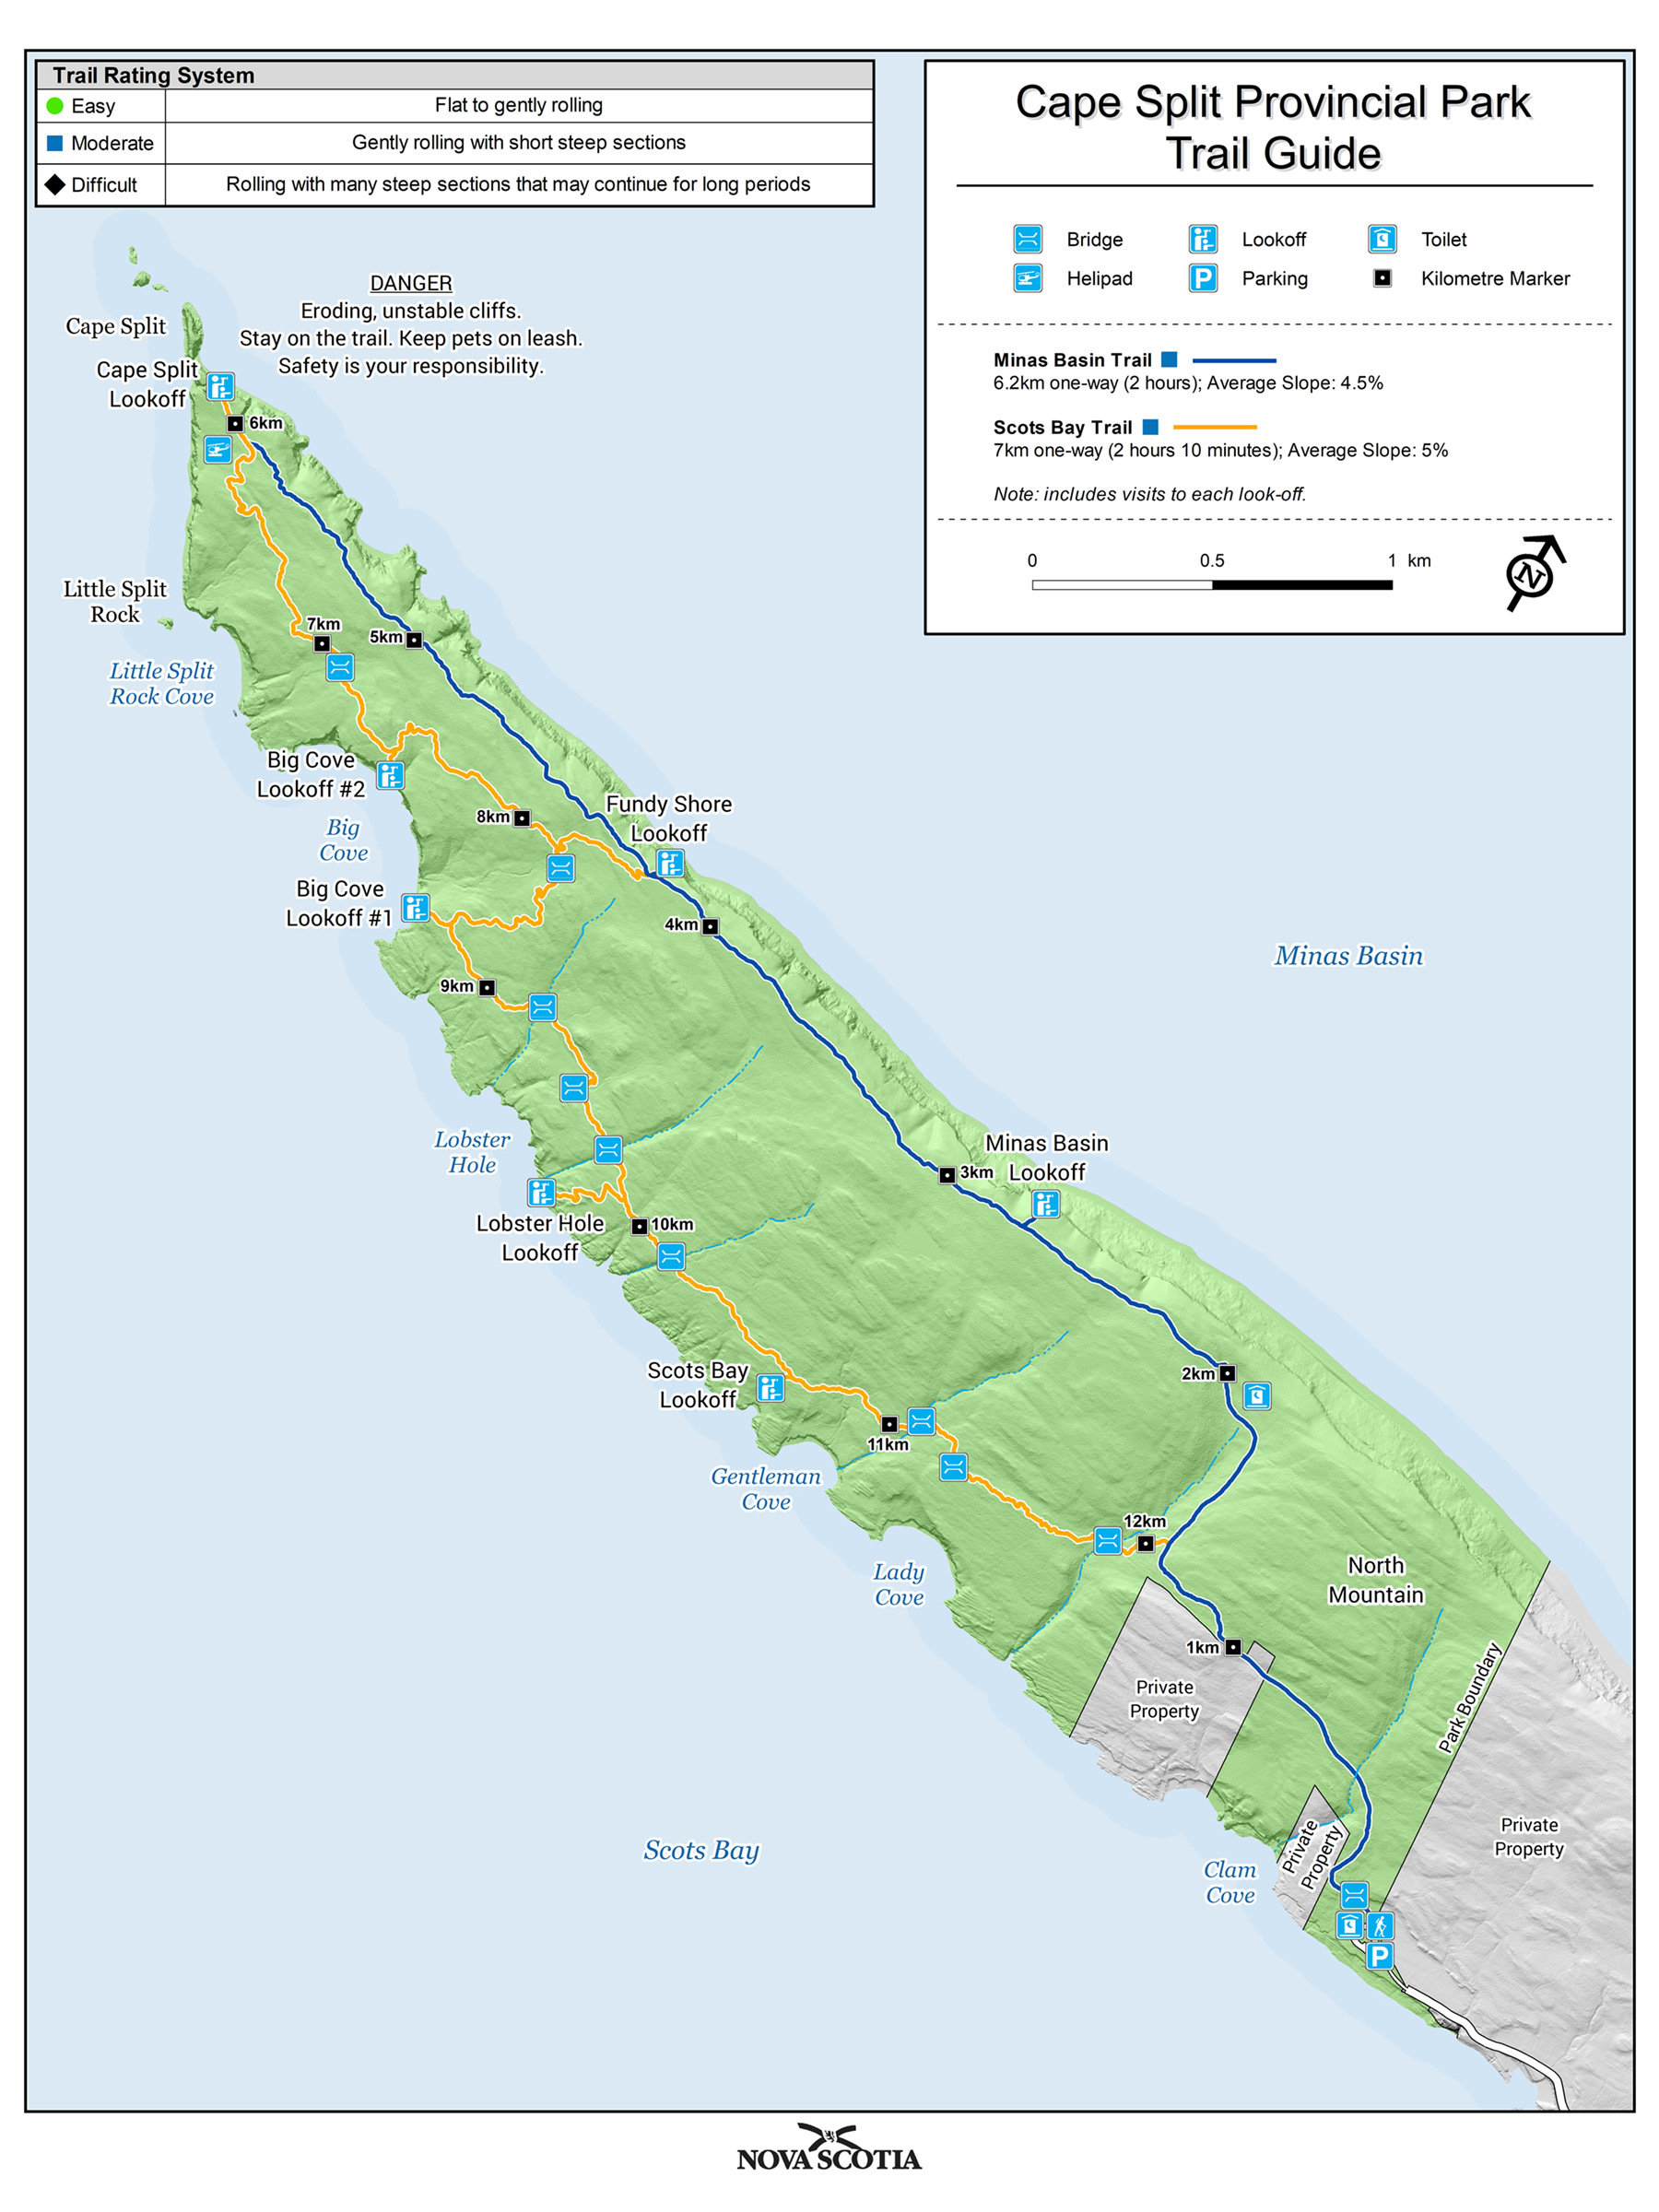 Map of Cape Split looped trail system